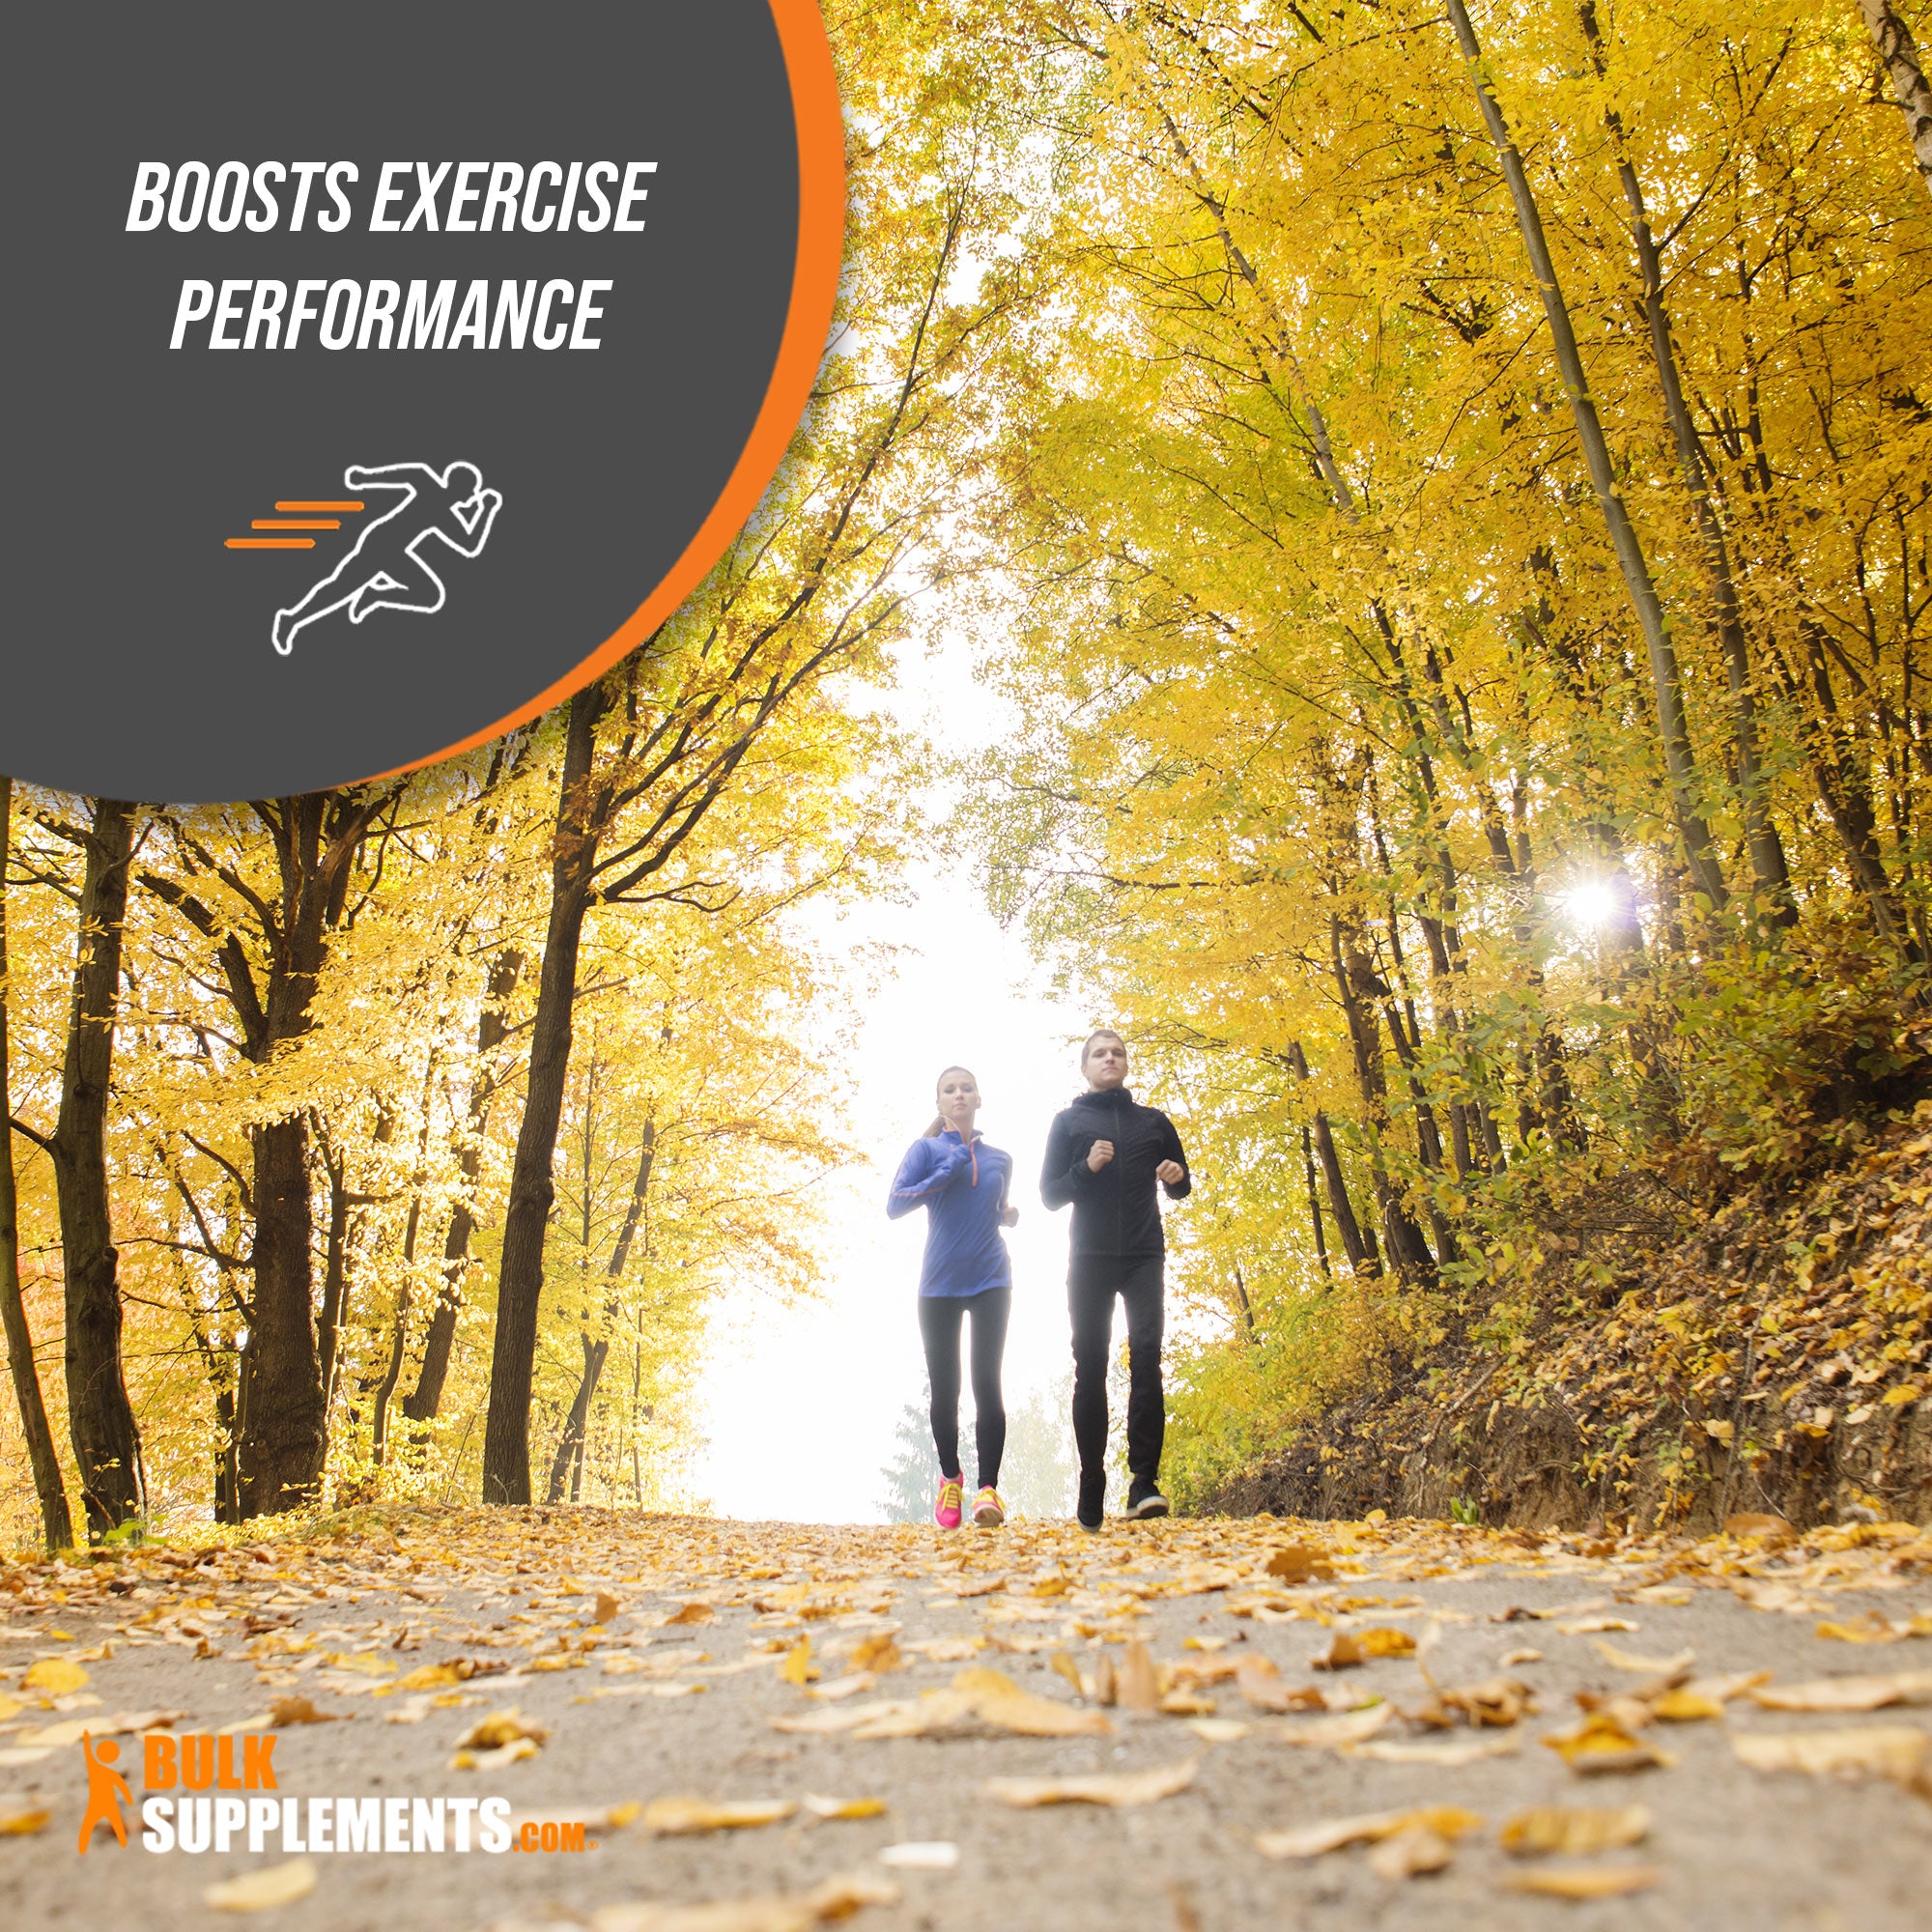 D-Ribose Exercise Performance Benefit